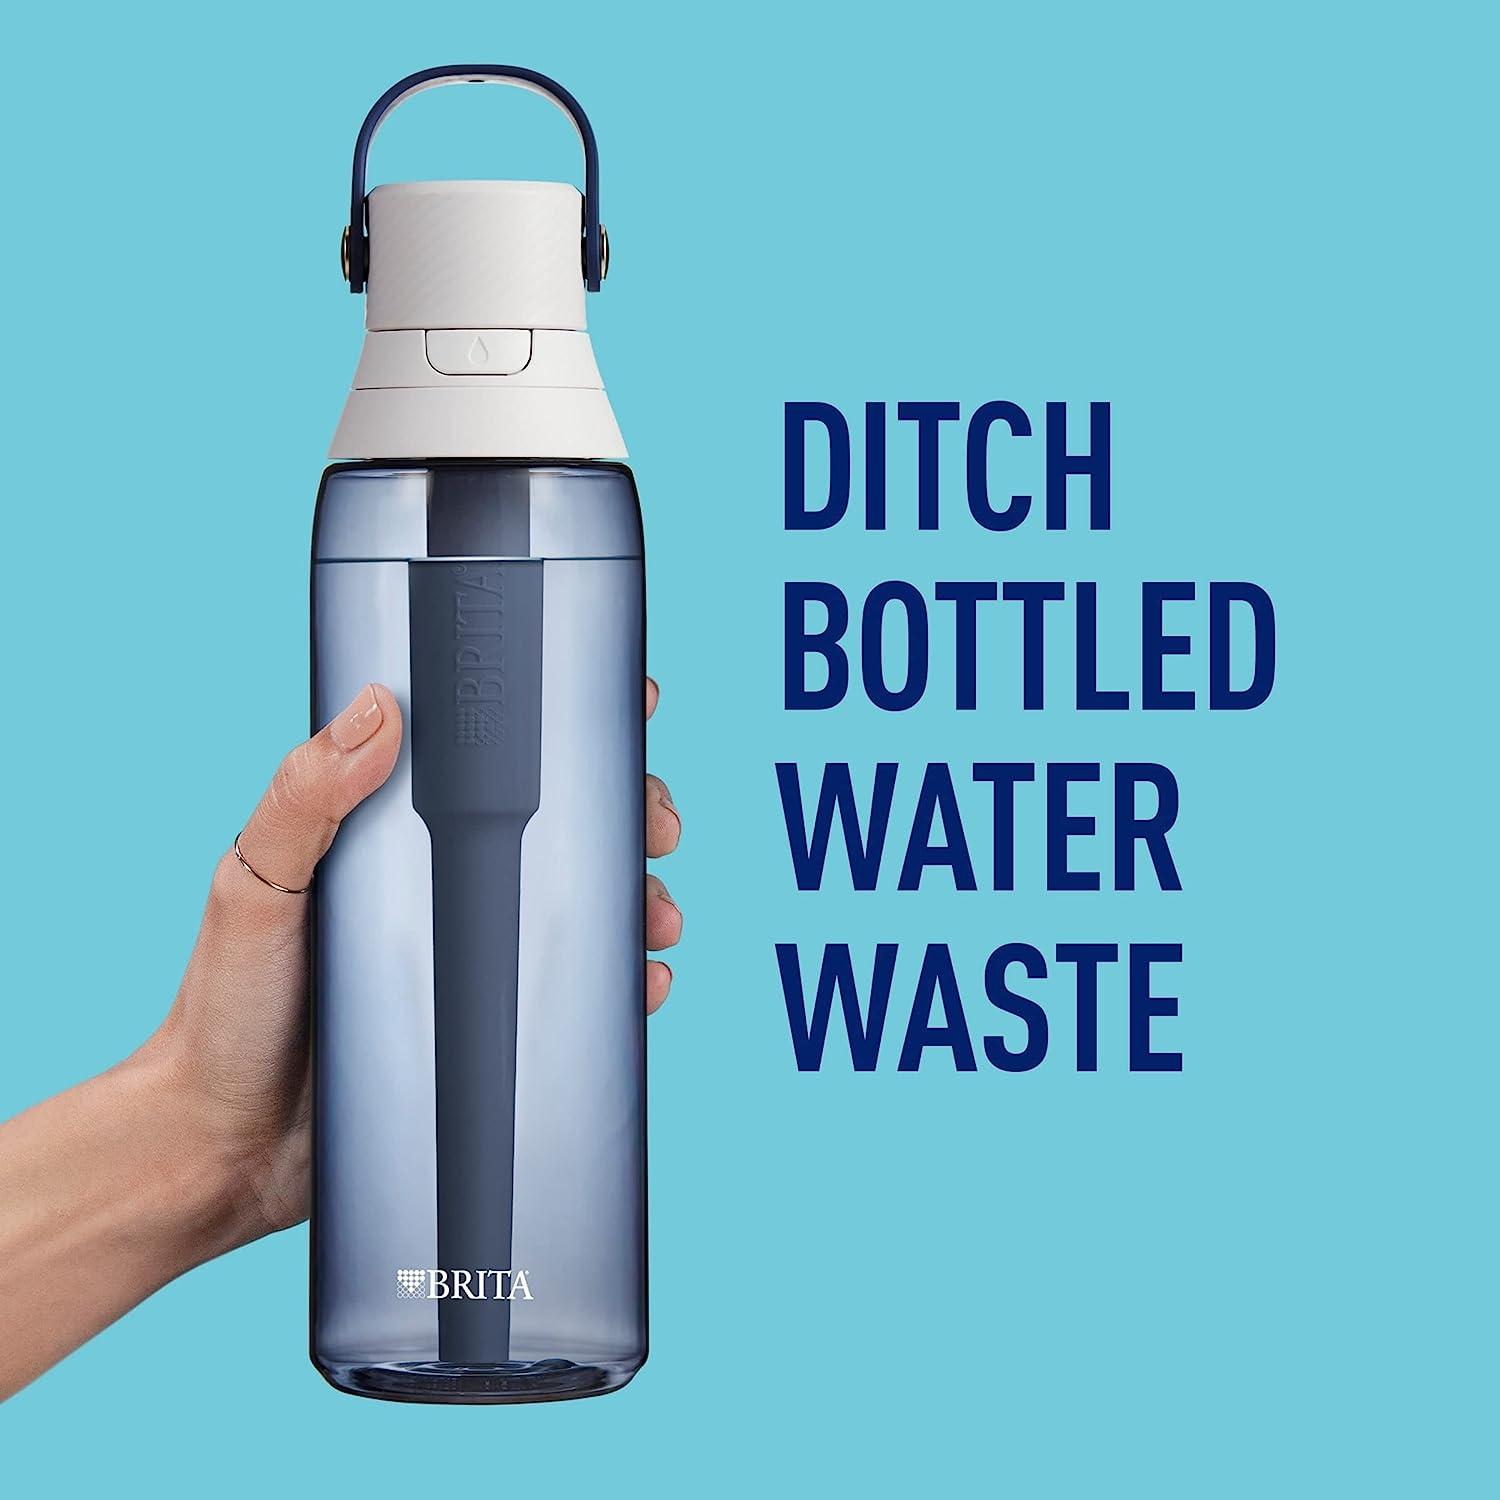  Brita Insulated Filtered Water Bottle with Straw